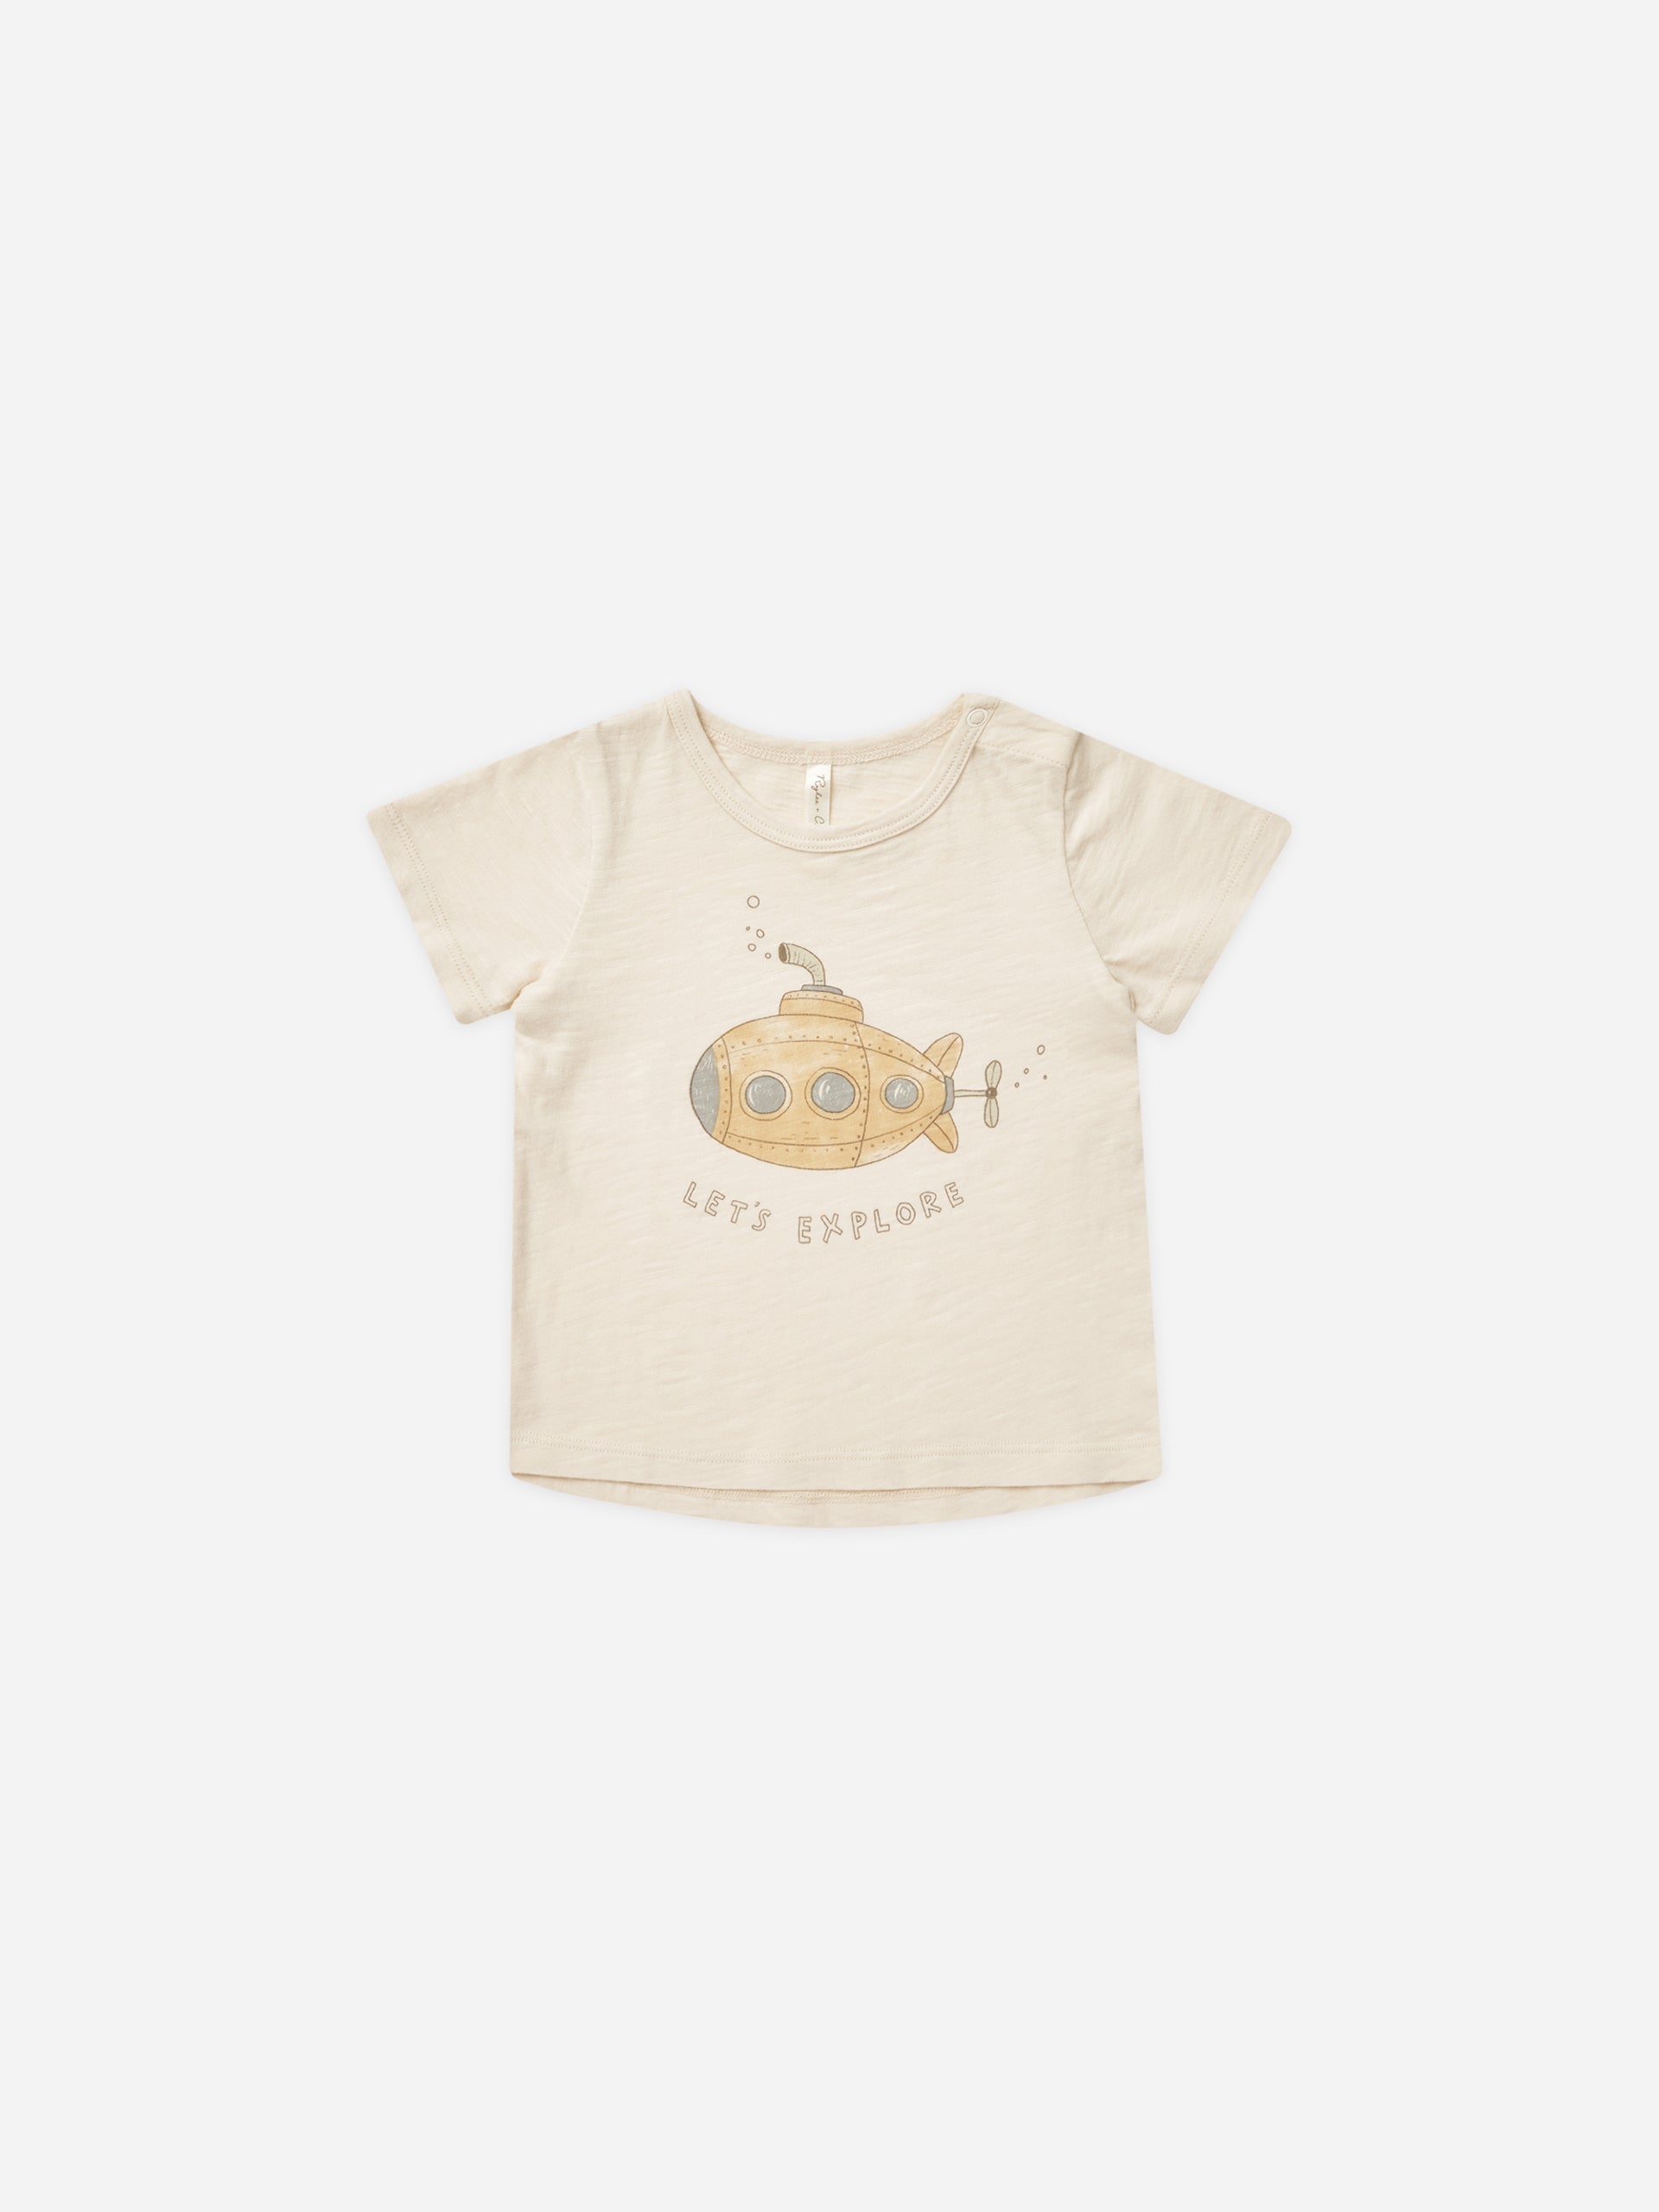 Basic Tee || Submarine - Rylee + Cru | Kids Clothes | Trendy Baby Clothes | Modern Infant Outfits |